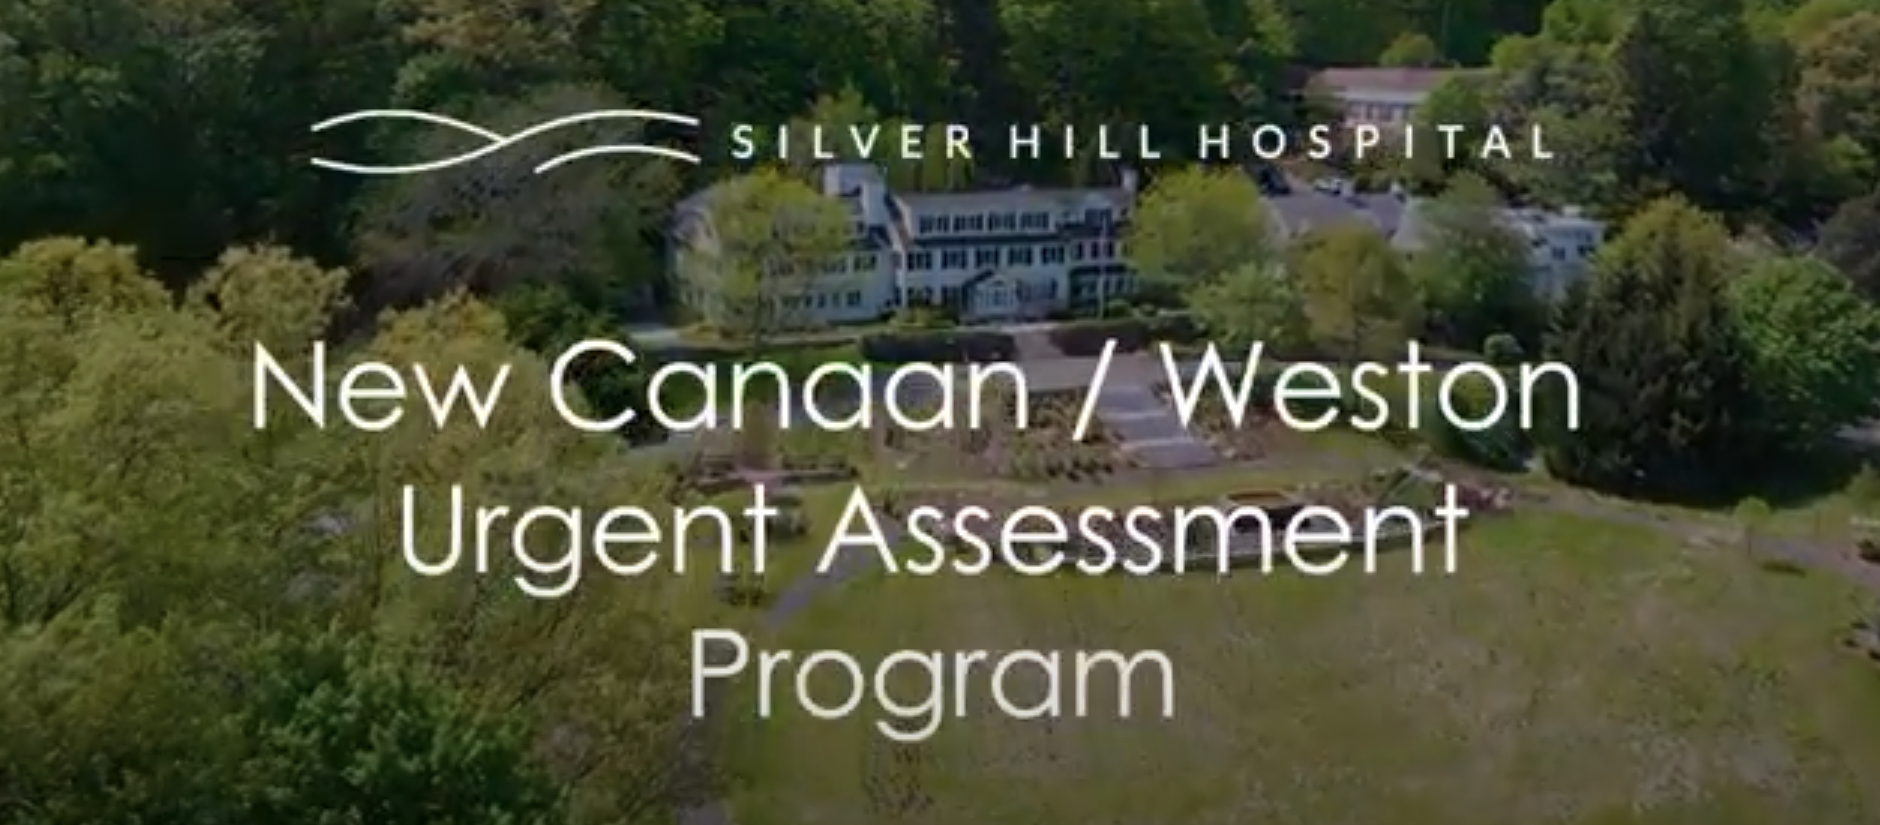 new Canaan urgent assessment. Free, confidential, mental health assessment and referral, Appointments offered within 48 hours.